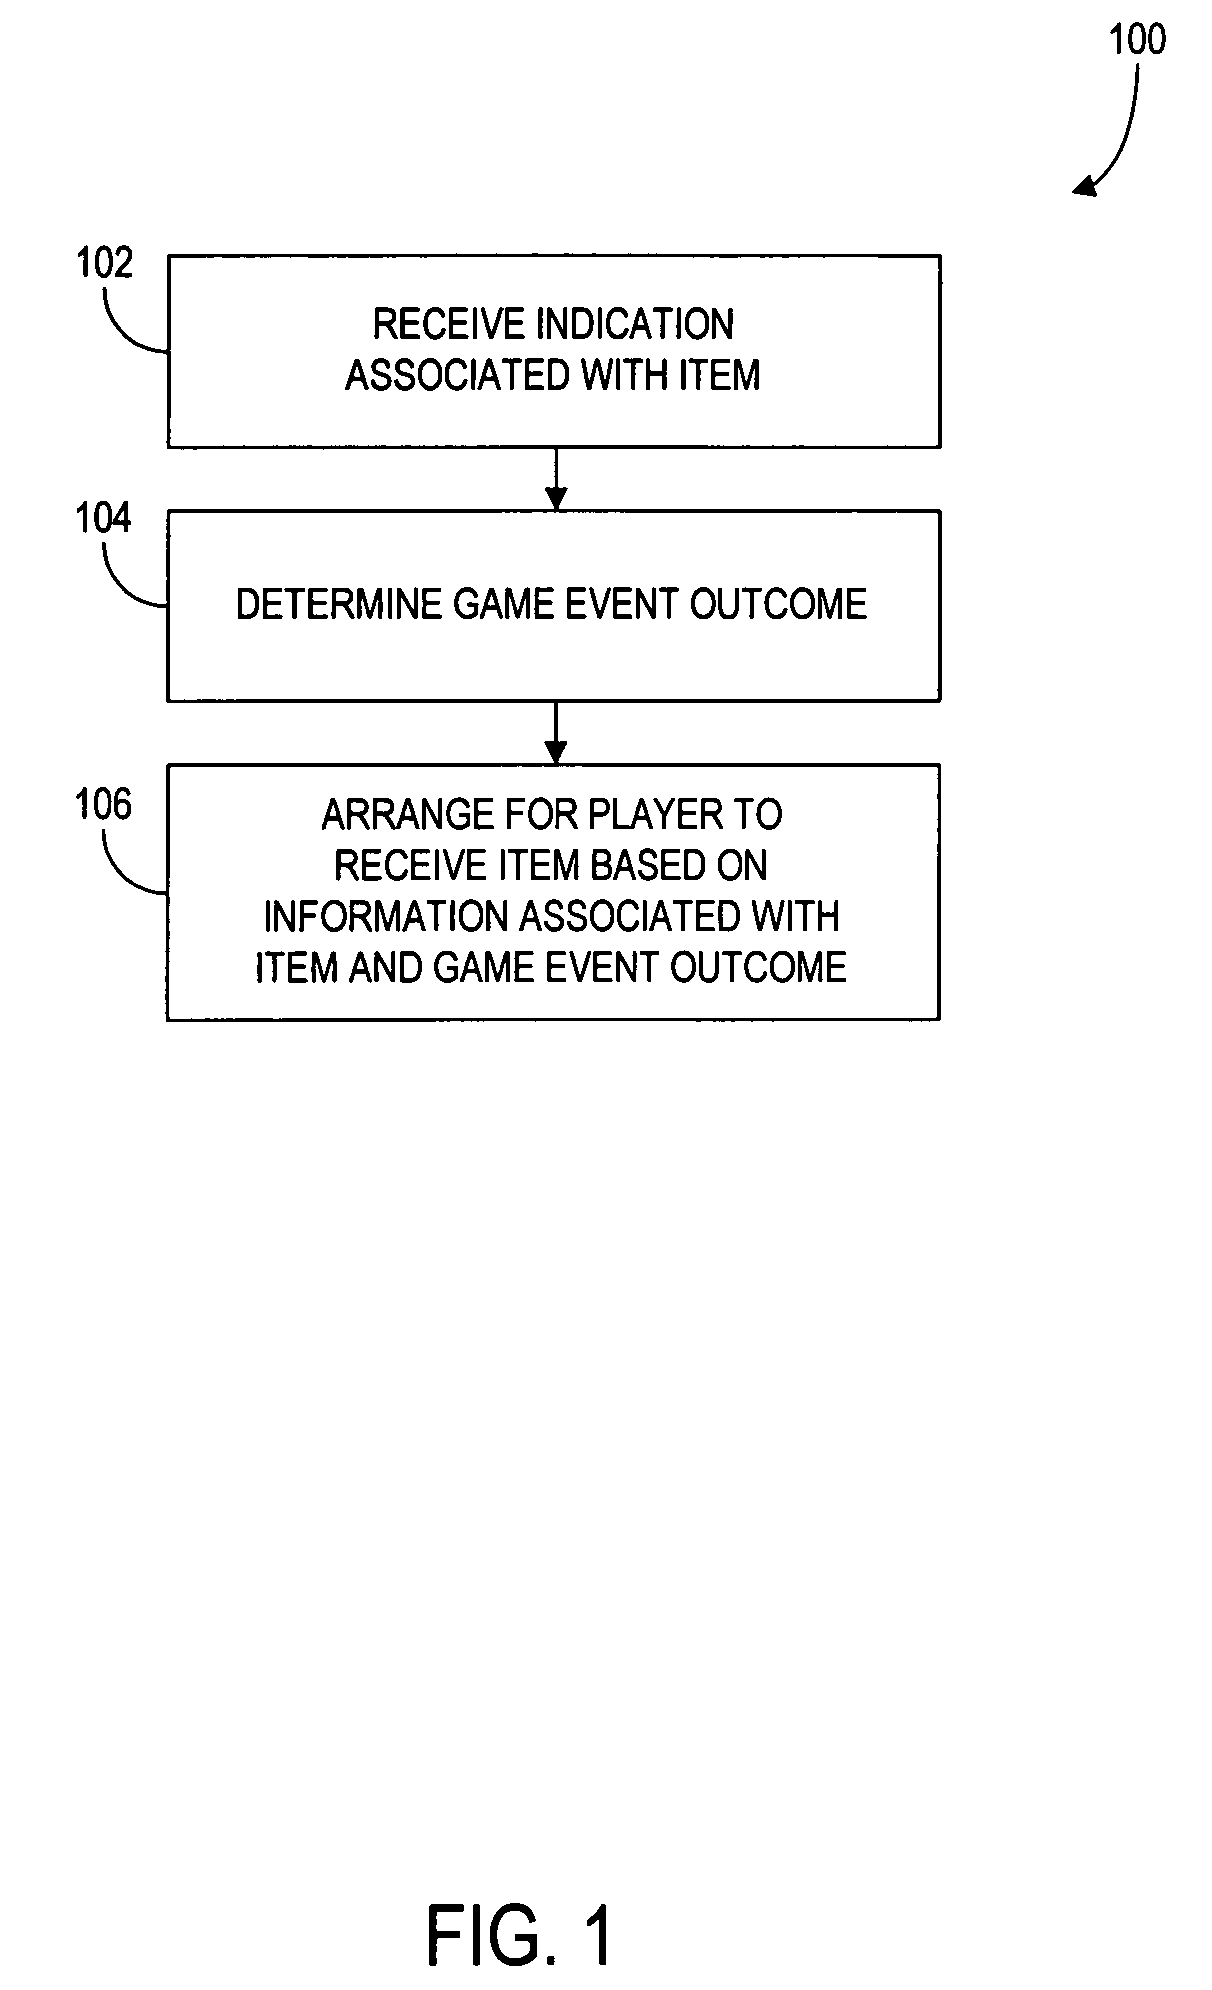 Systems and methods wherein a player indicates an item that may be received based on a game event outcome associated with the player